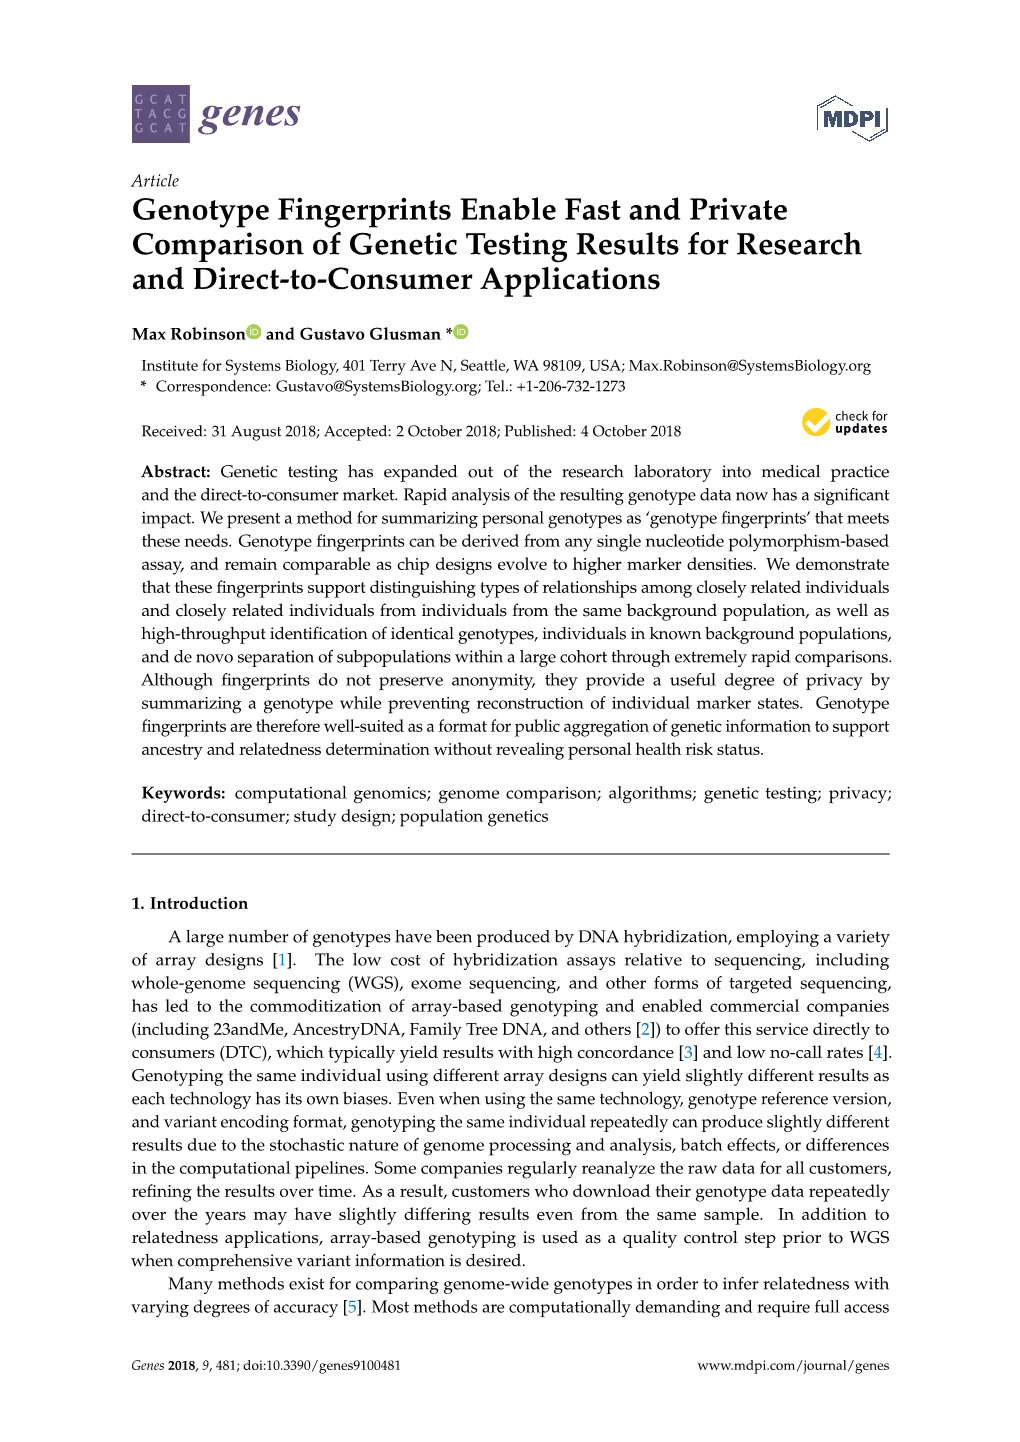 Genotype Fingerprints Enable Fast and Private Comparison of Genetic Testing Results for Research and Direct-To-Consumer Applications